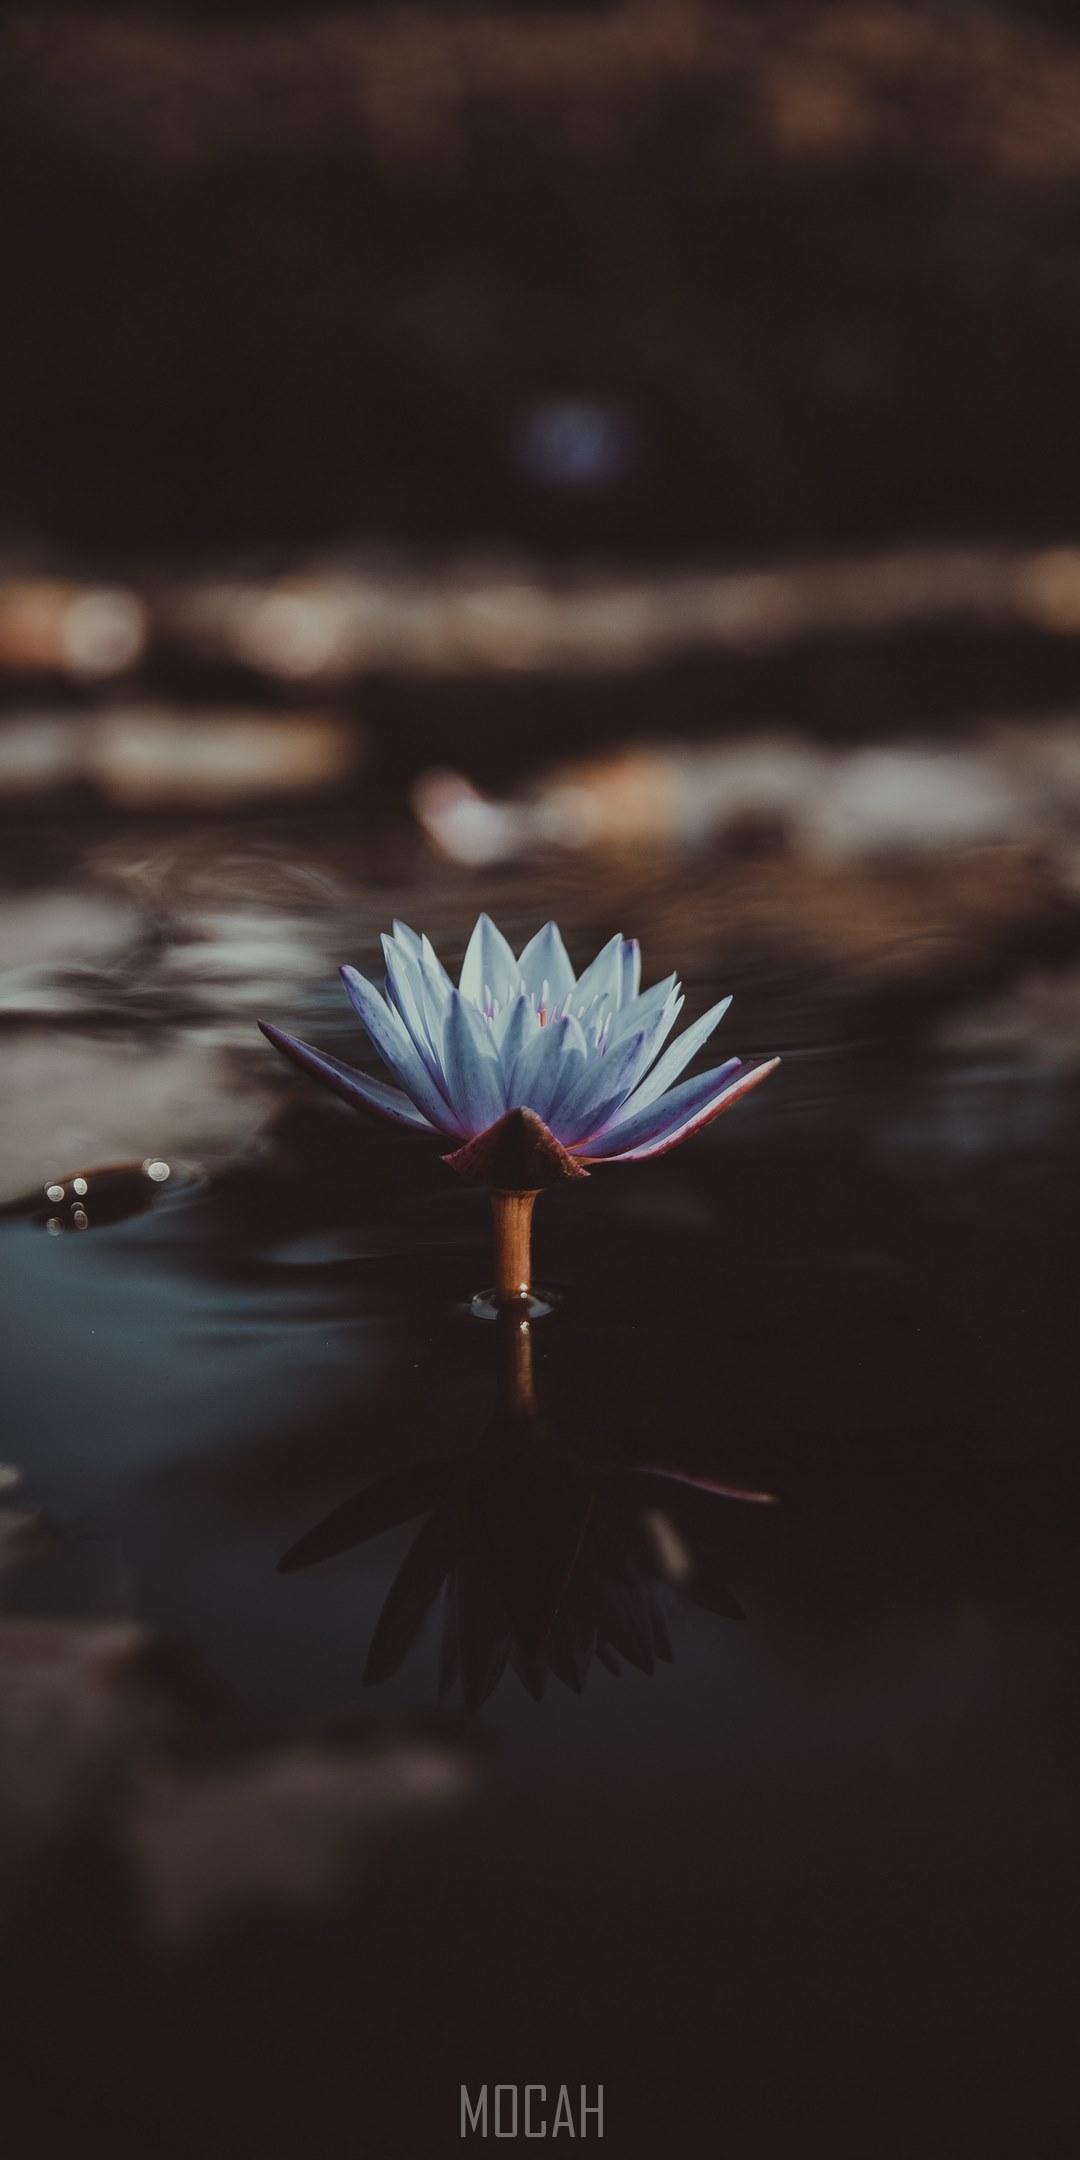 HD wallpaper, Scared To Be Lonely, A Light Violet Water Lily Jutting Out From The Surface Of Water, 1080X2160, Xiaomi Redmi Note 5 Plus Full Hd Wallpaper